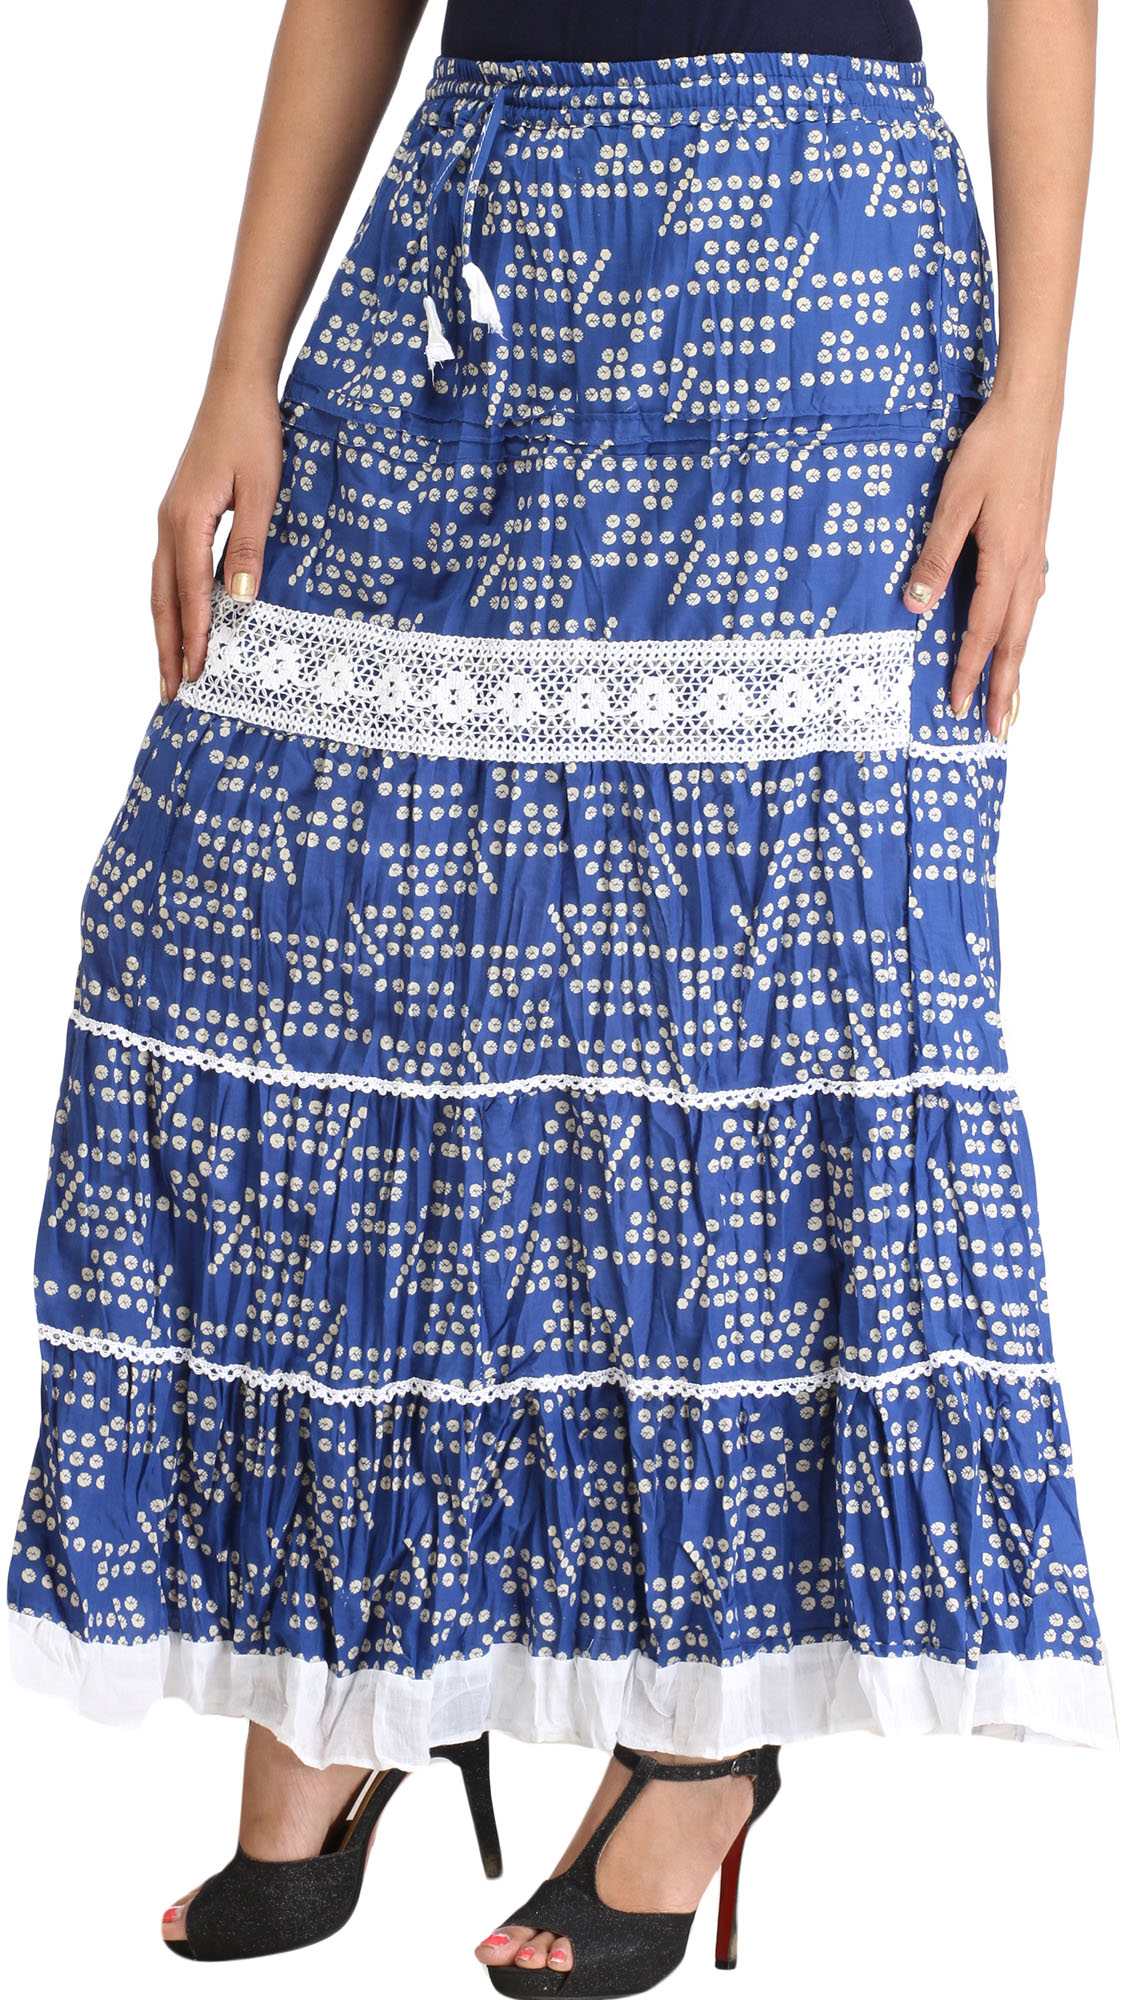 Nautical-Blue Long Skirt with Printed Bootis and Crochet | Exotic India Art